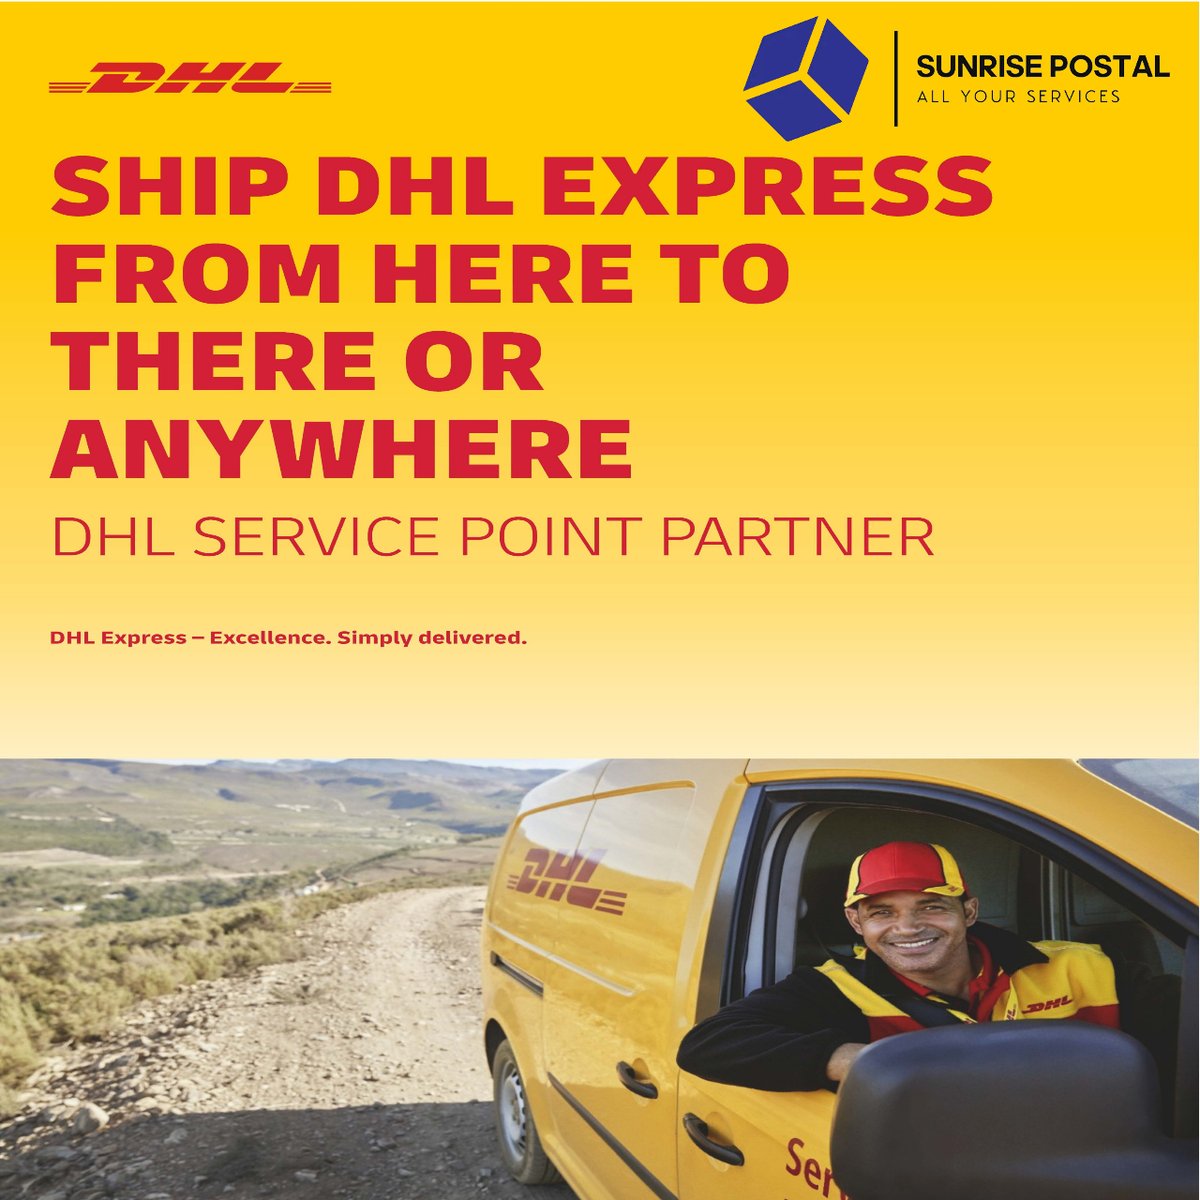 sunrise-postal.com
📦Need to send a package quickly and securely? 🌍✈️ Whether it's a small parcel or a large shipment, trust us for reliable and efficient delivery services worldwide. Contact us to shipping options and get your package on its way! #DHLShipping #FastDelivery